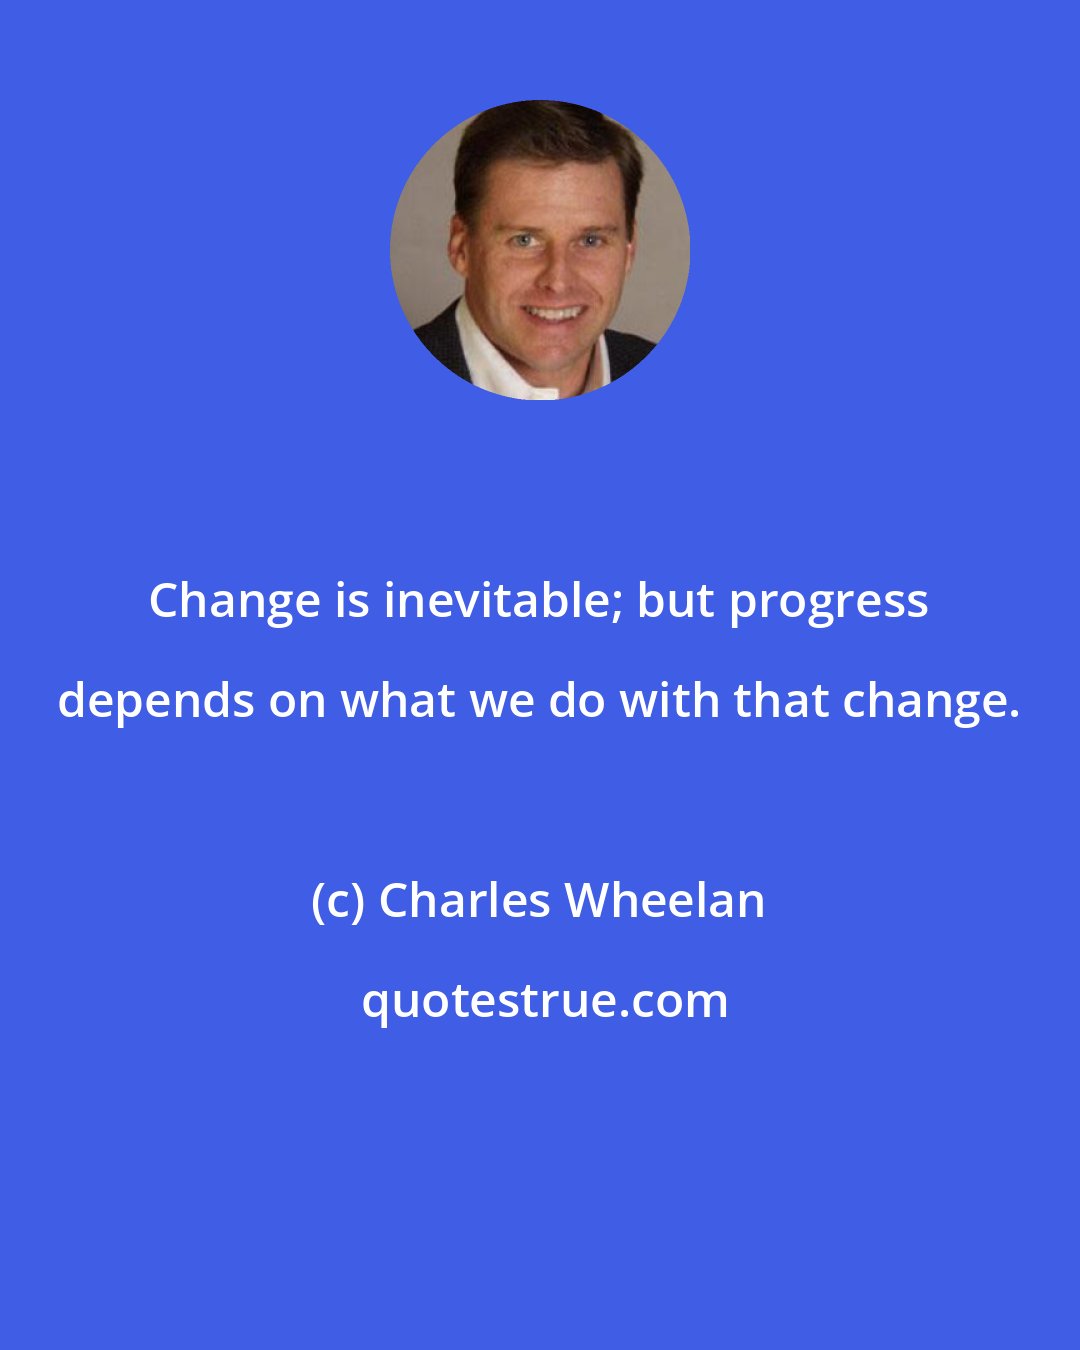 Charles Wheelan: Change is inevitable; but progress depends on what we do with that change.